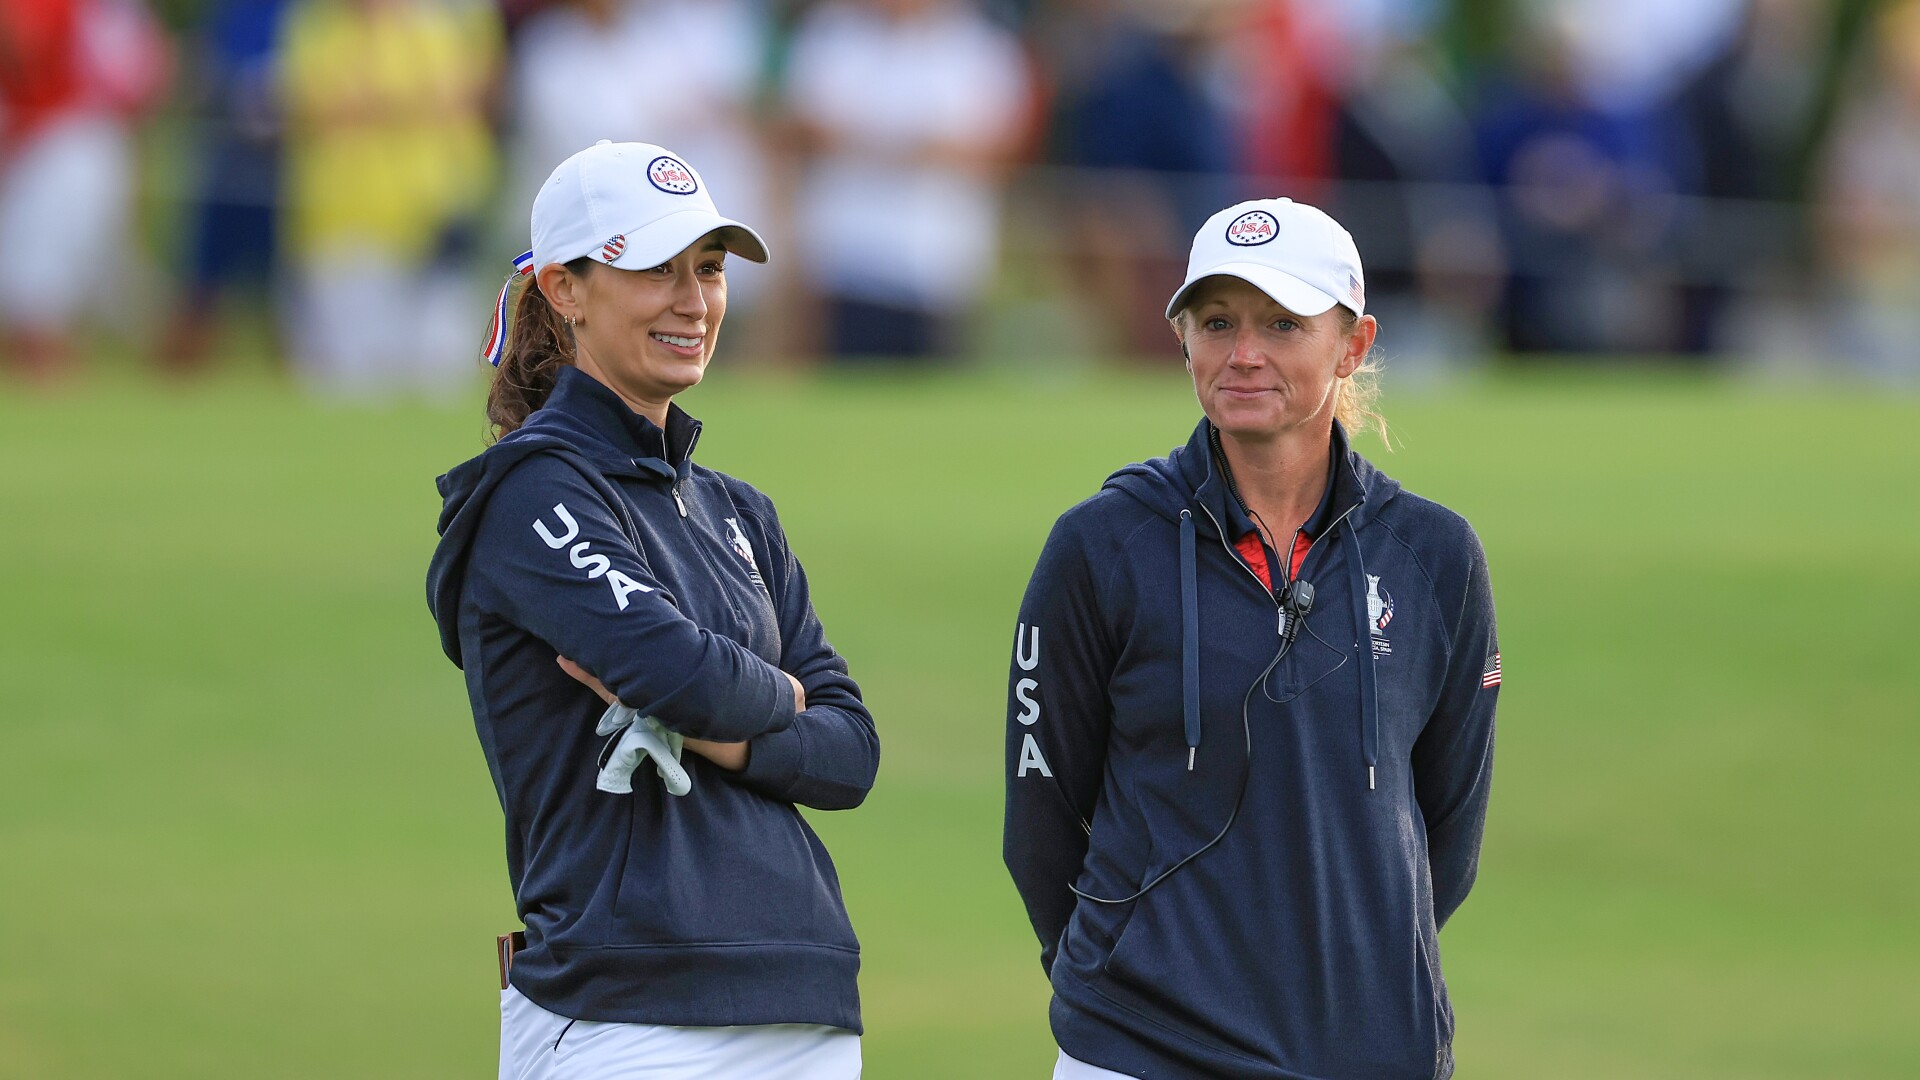 U.S. sweeps foursomes session for first time in Solheim Cup history